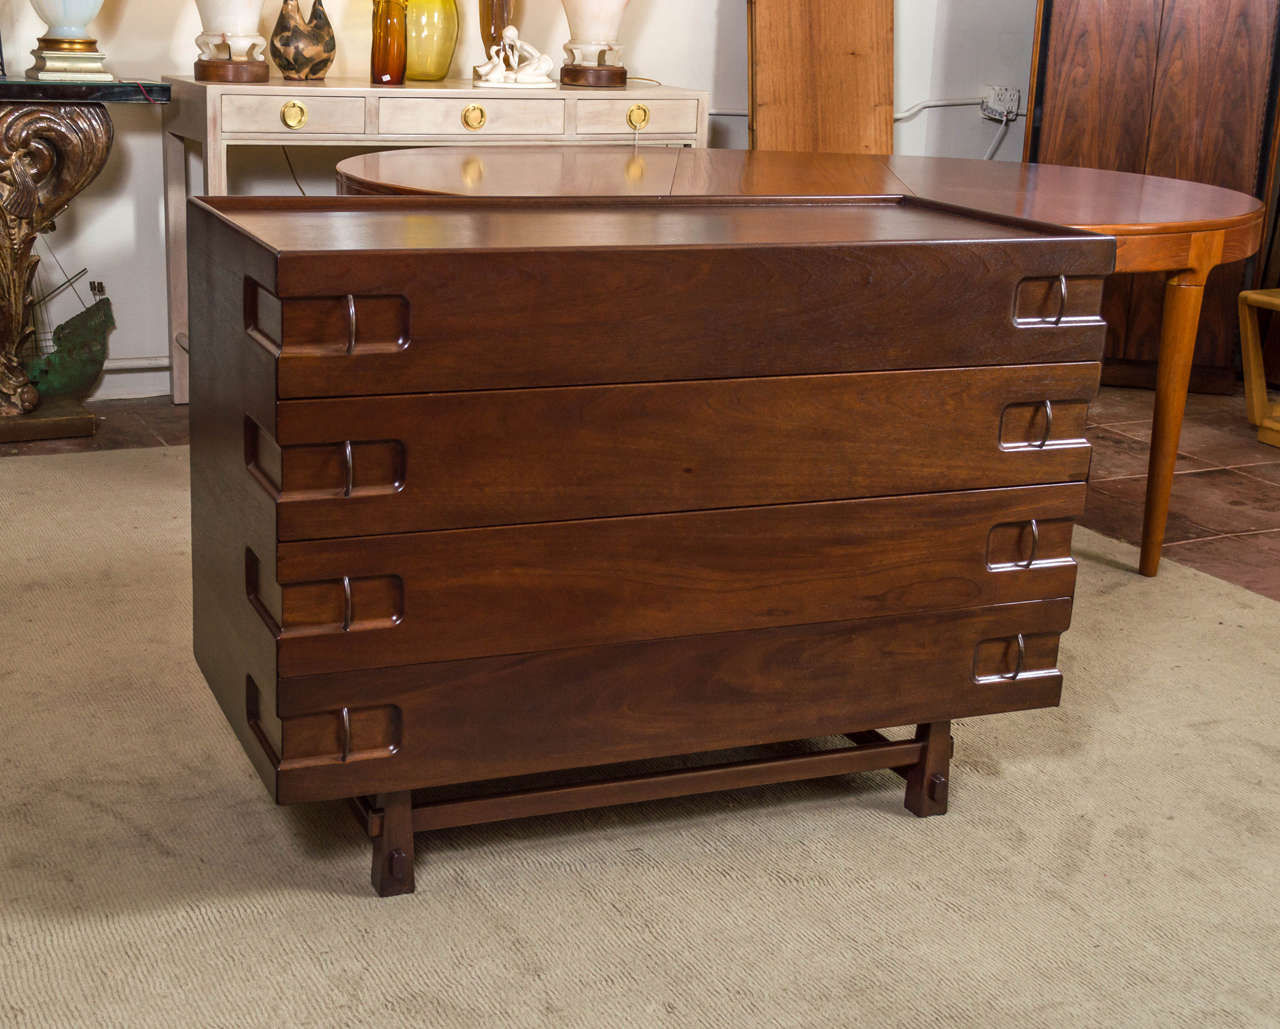 Mexican Mid-Century Modern dresser in mahogany, an Edmond Spence for Industria Mueblera of Mexico.